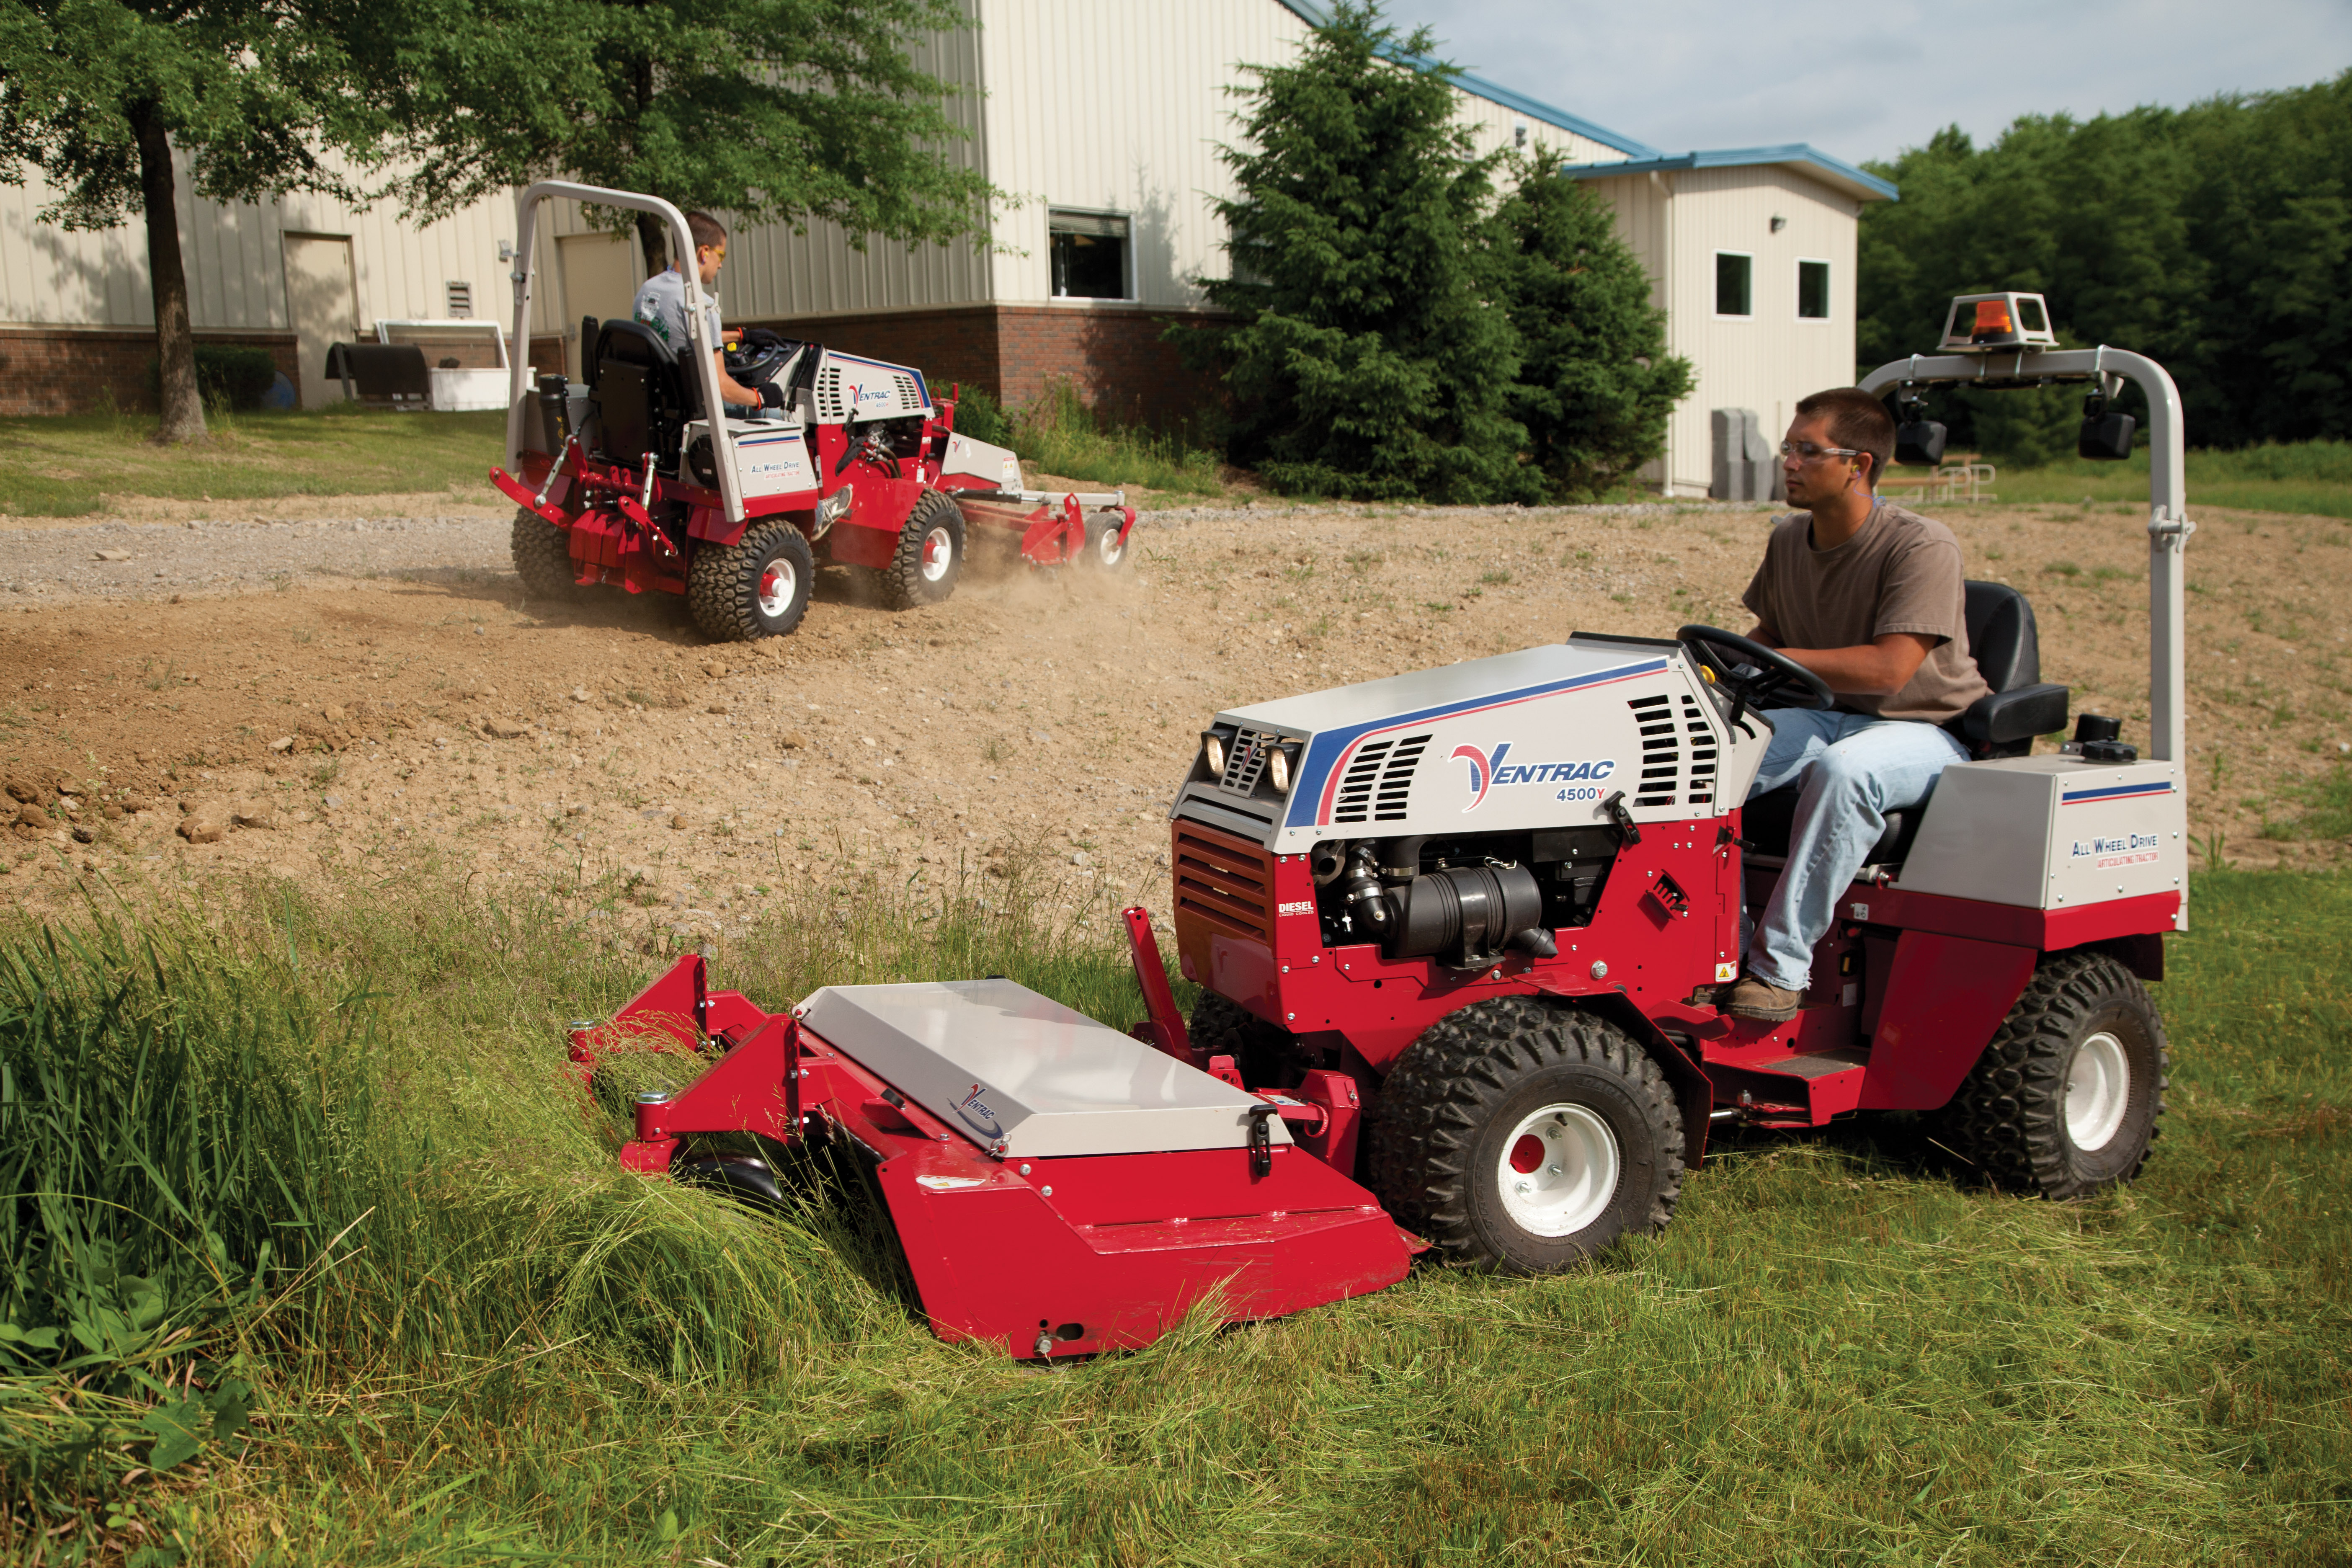 Showing off the new Ventrac 4500 with Power Rake and Tough Cut Deck